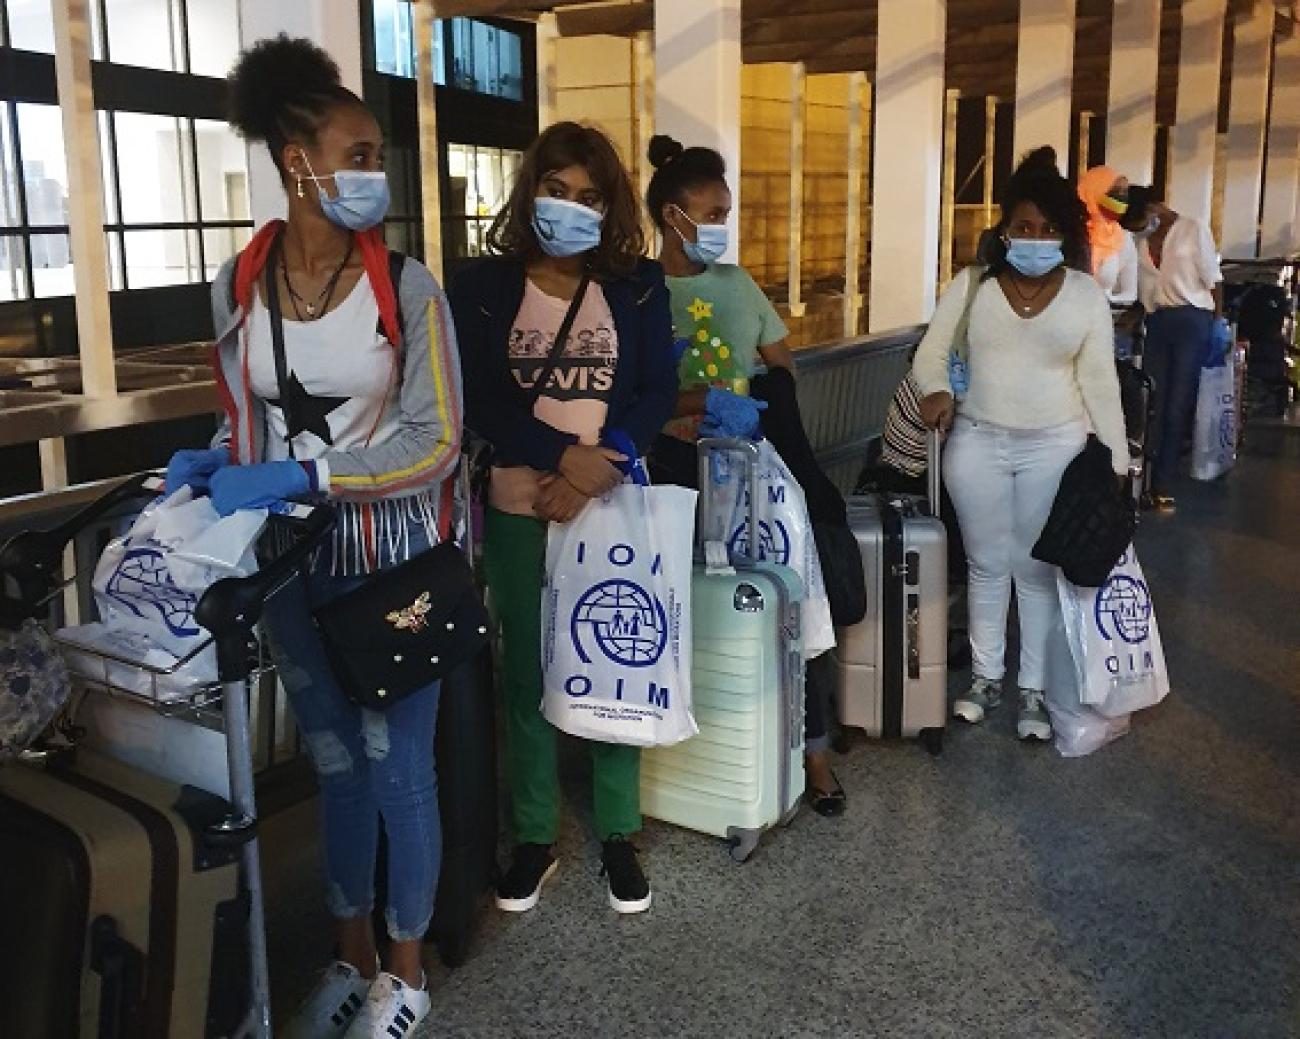 Migrants stranded in Lebanon amidst worsening economic crisis return home with IOM assistance